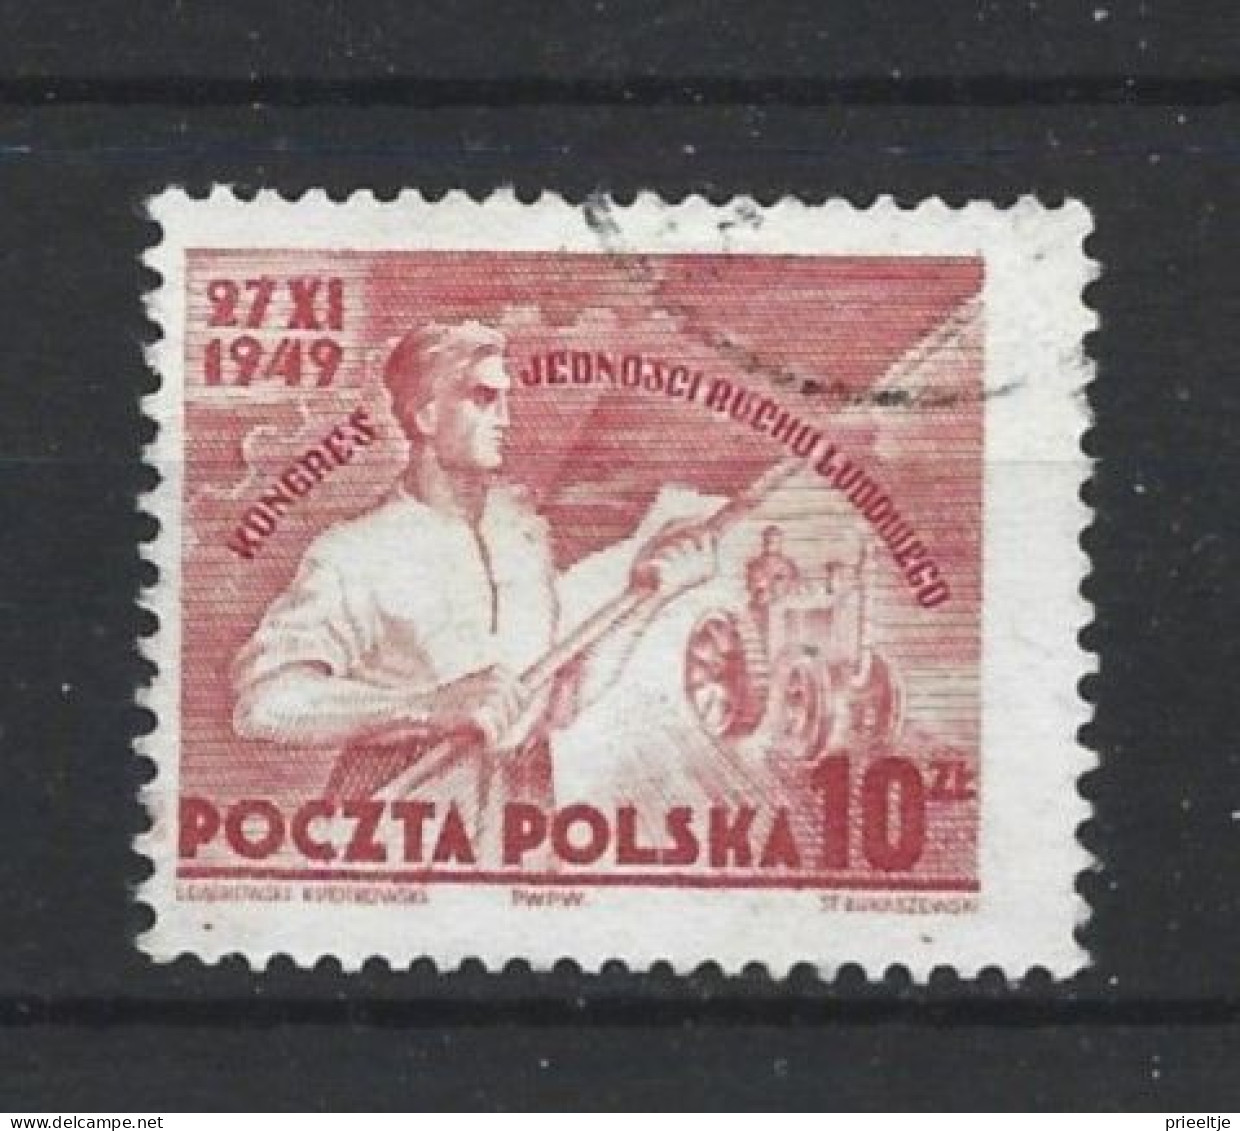 Poland 1949 Popular Movement Union Congress Y.T. 558 (0) - Used Stamps